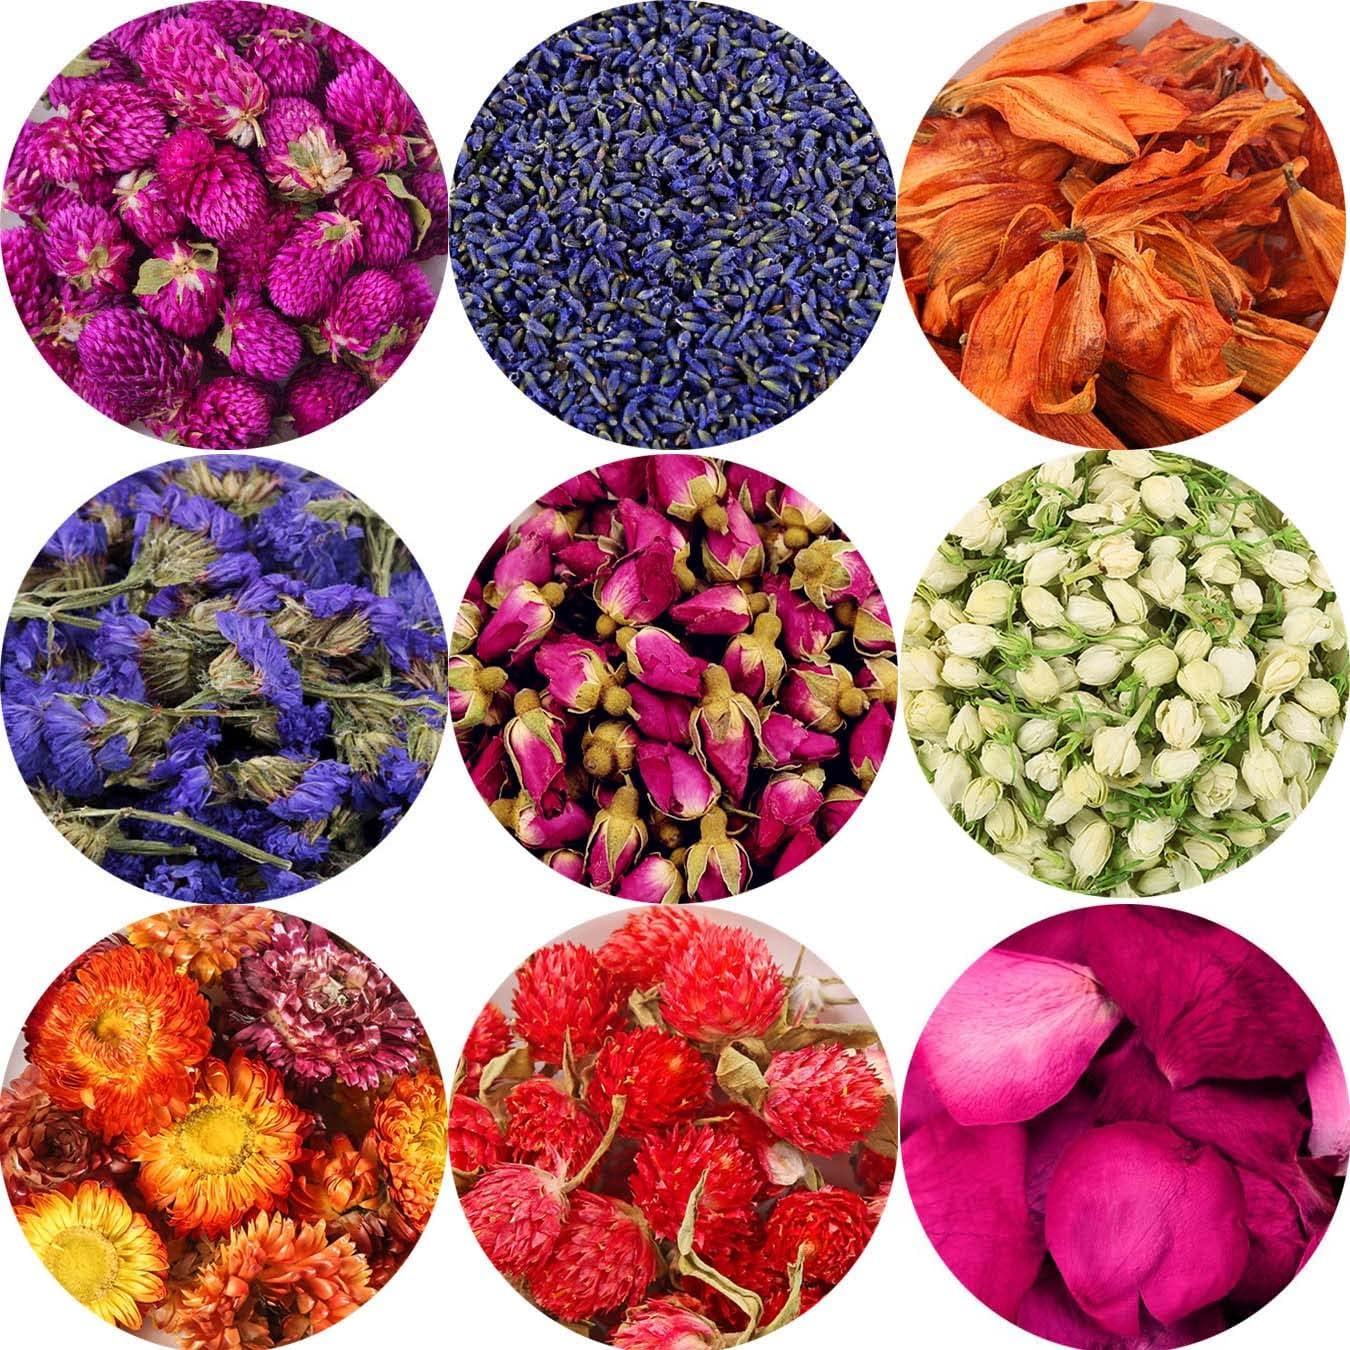 9 Bags Dried Flowers,100% Natural Dried Flowers Herbs Kit for Soap Making,  DIY Candle Making,Bath - Include Rose Petals,Lavender,Don't Forget